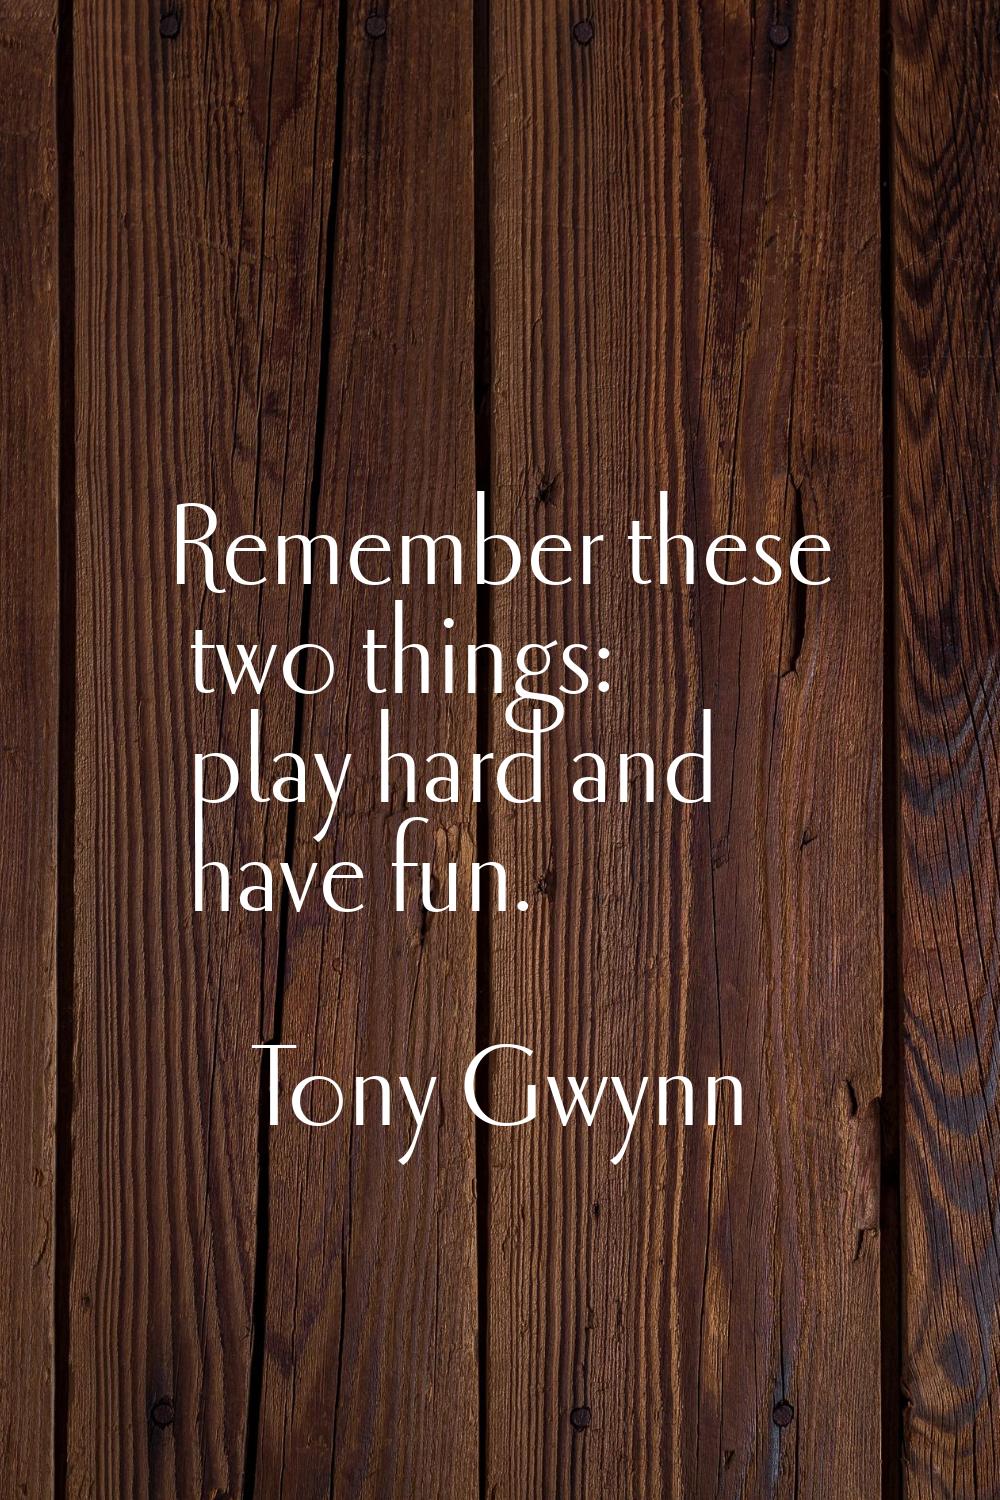 Remember these two things: play hard and have fun.